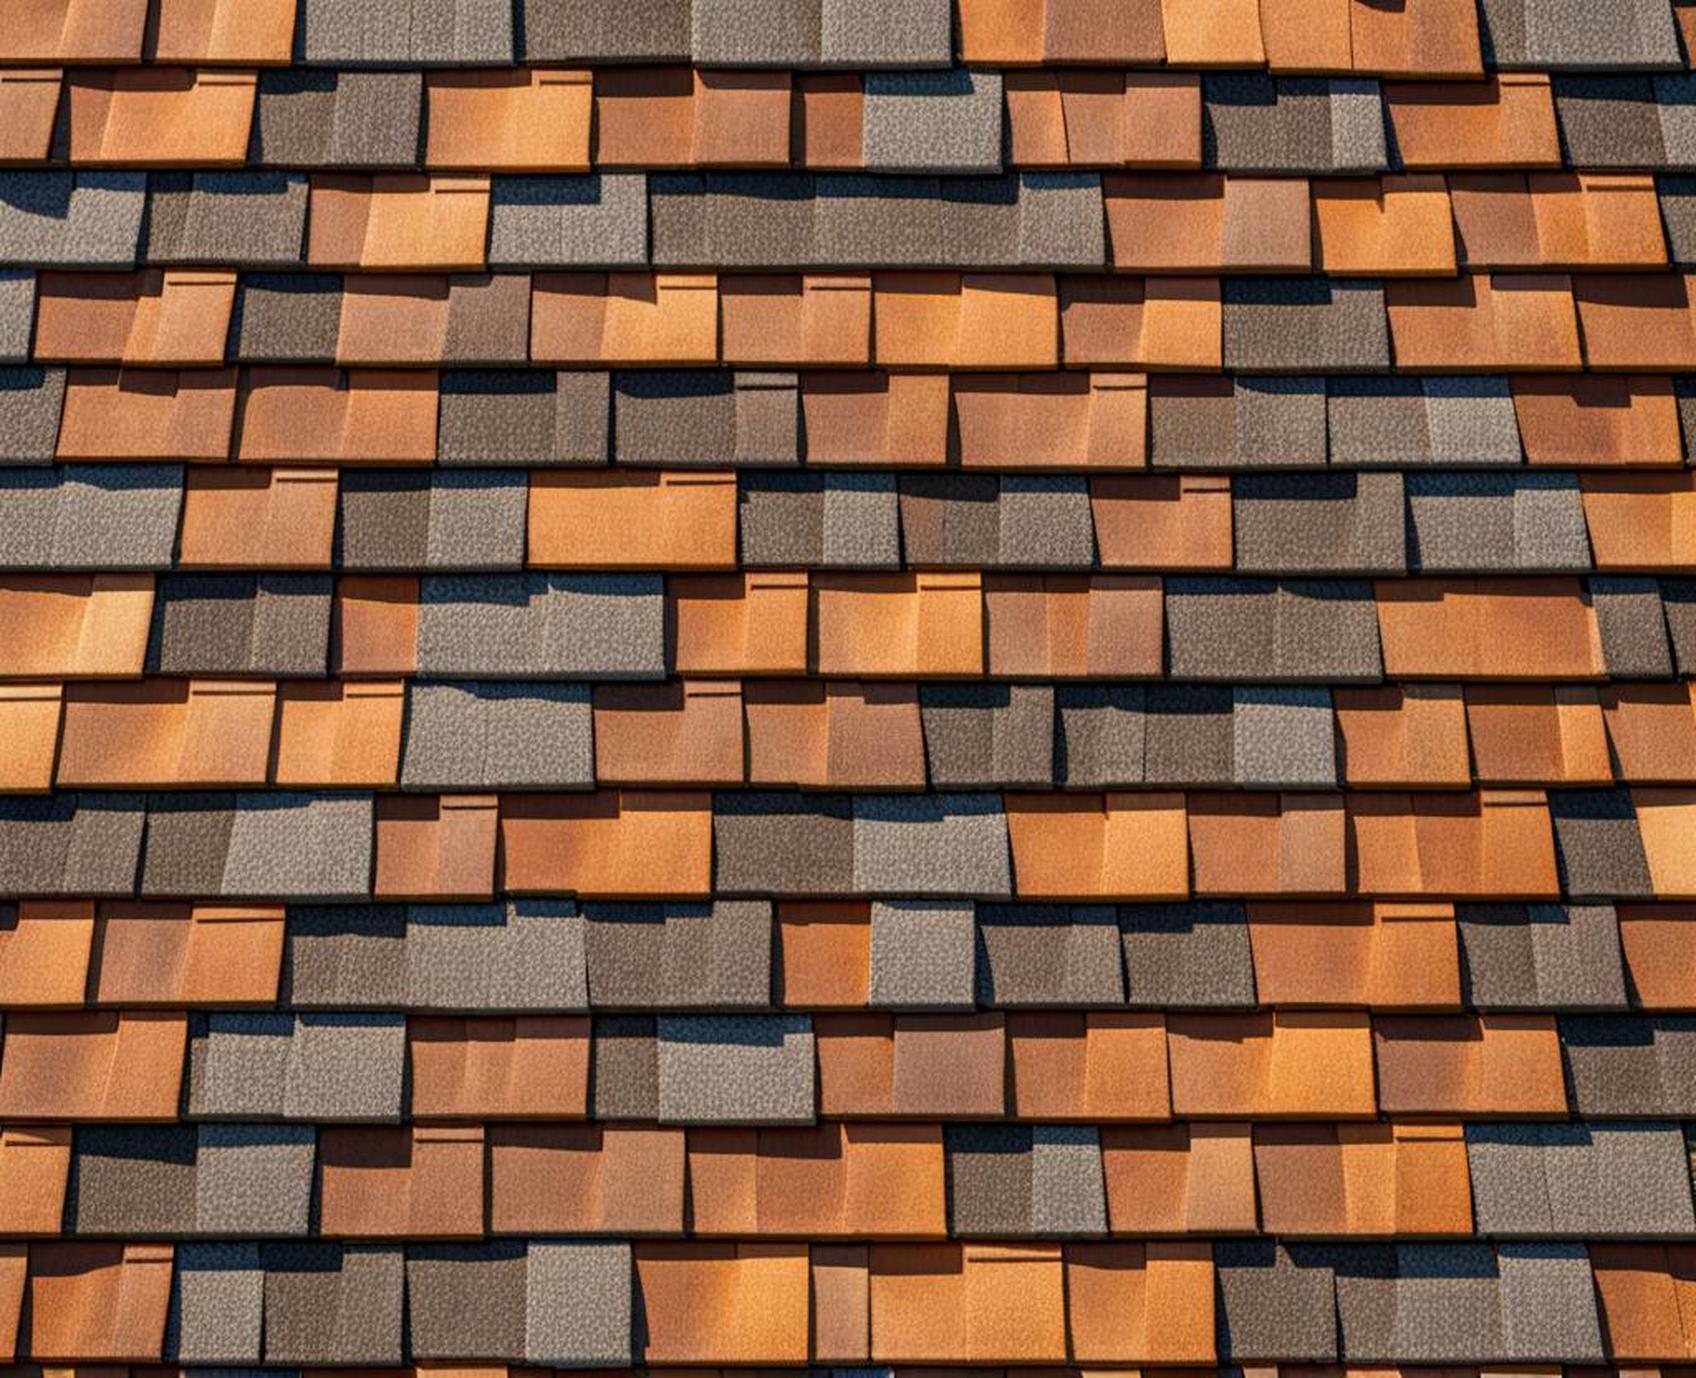 how many square feet are in a square of shingles